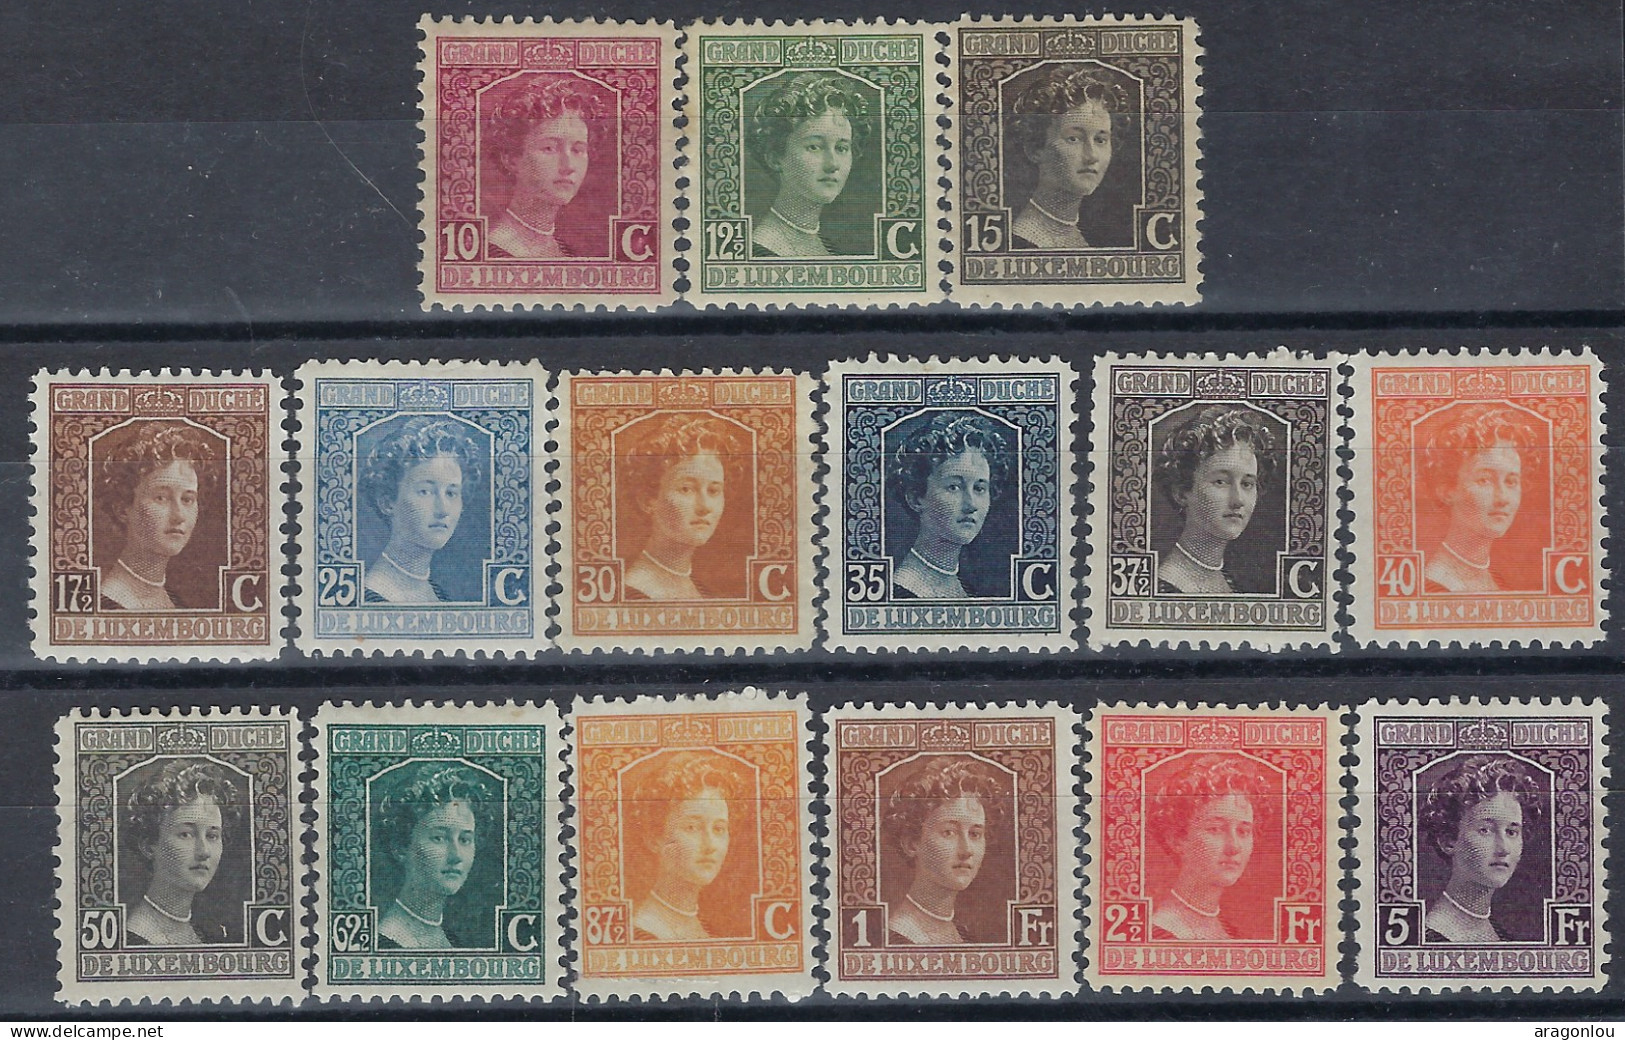 Luxembourg - Luxemburg - Timbre  1914   Marie-Adélaïde   Série   * - 1914-24 Maria-Adelaide